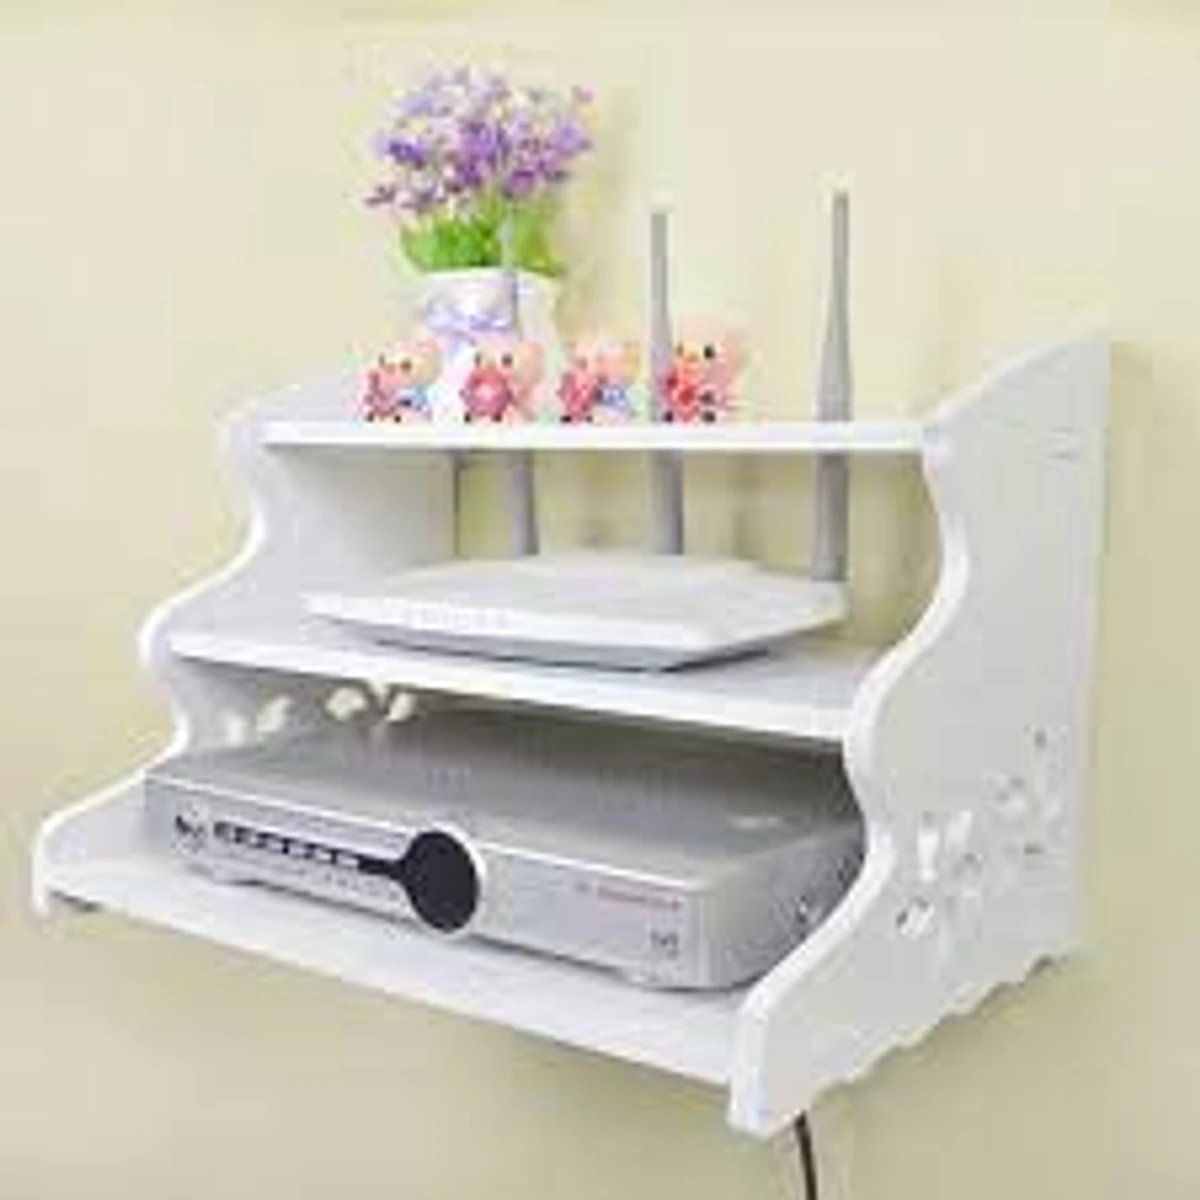 WiFi Router storage Stand Set Wall Floating Shelves Wall Mount Model big (3 layer)